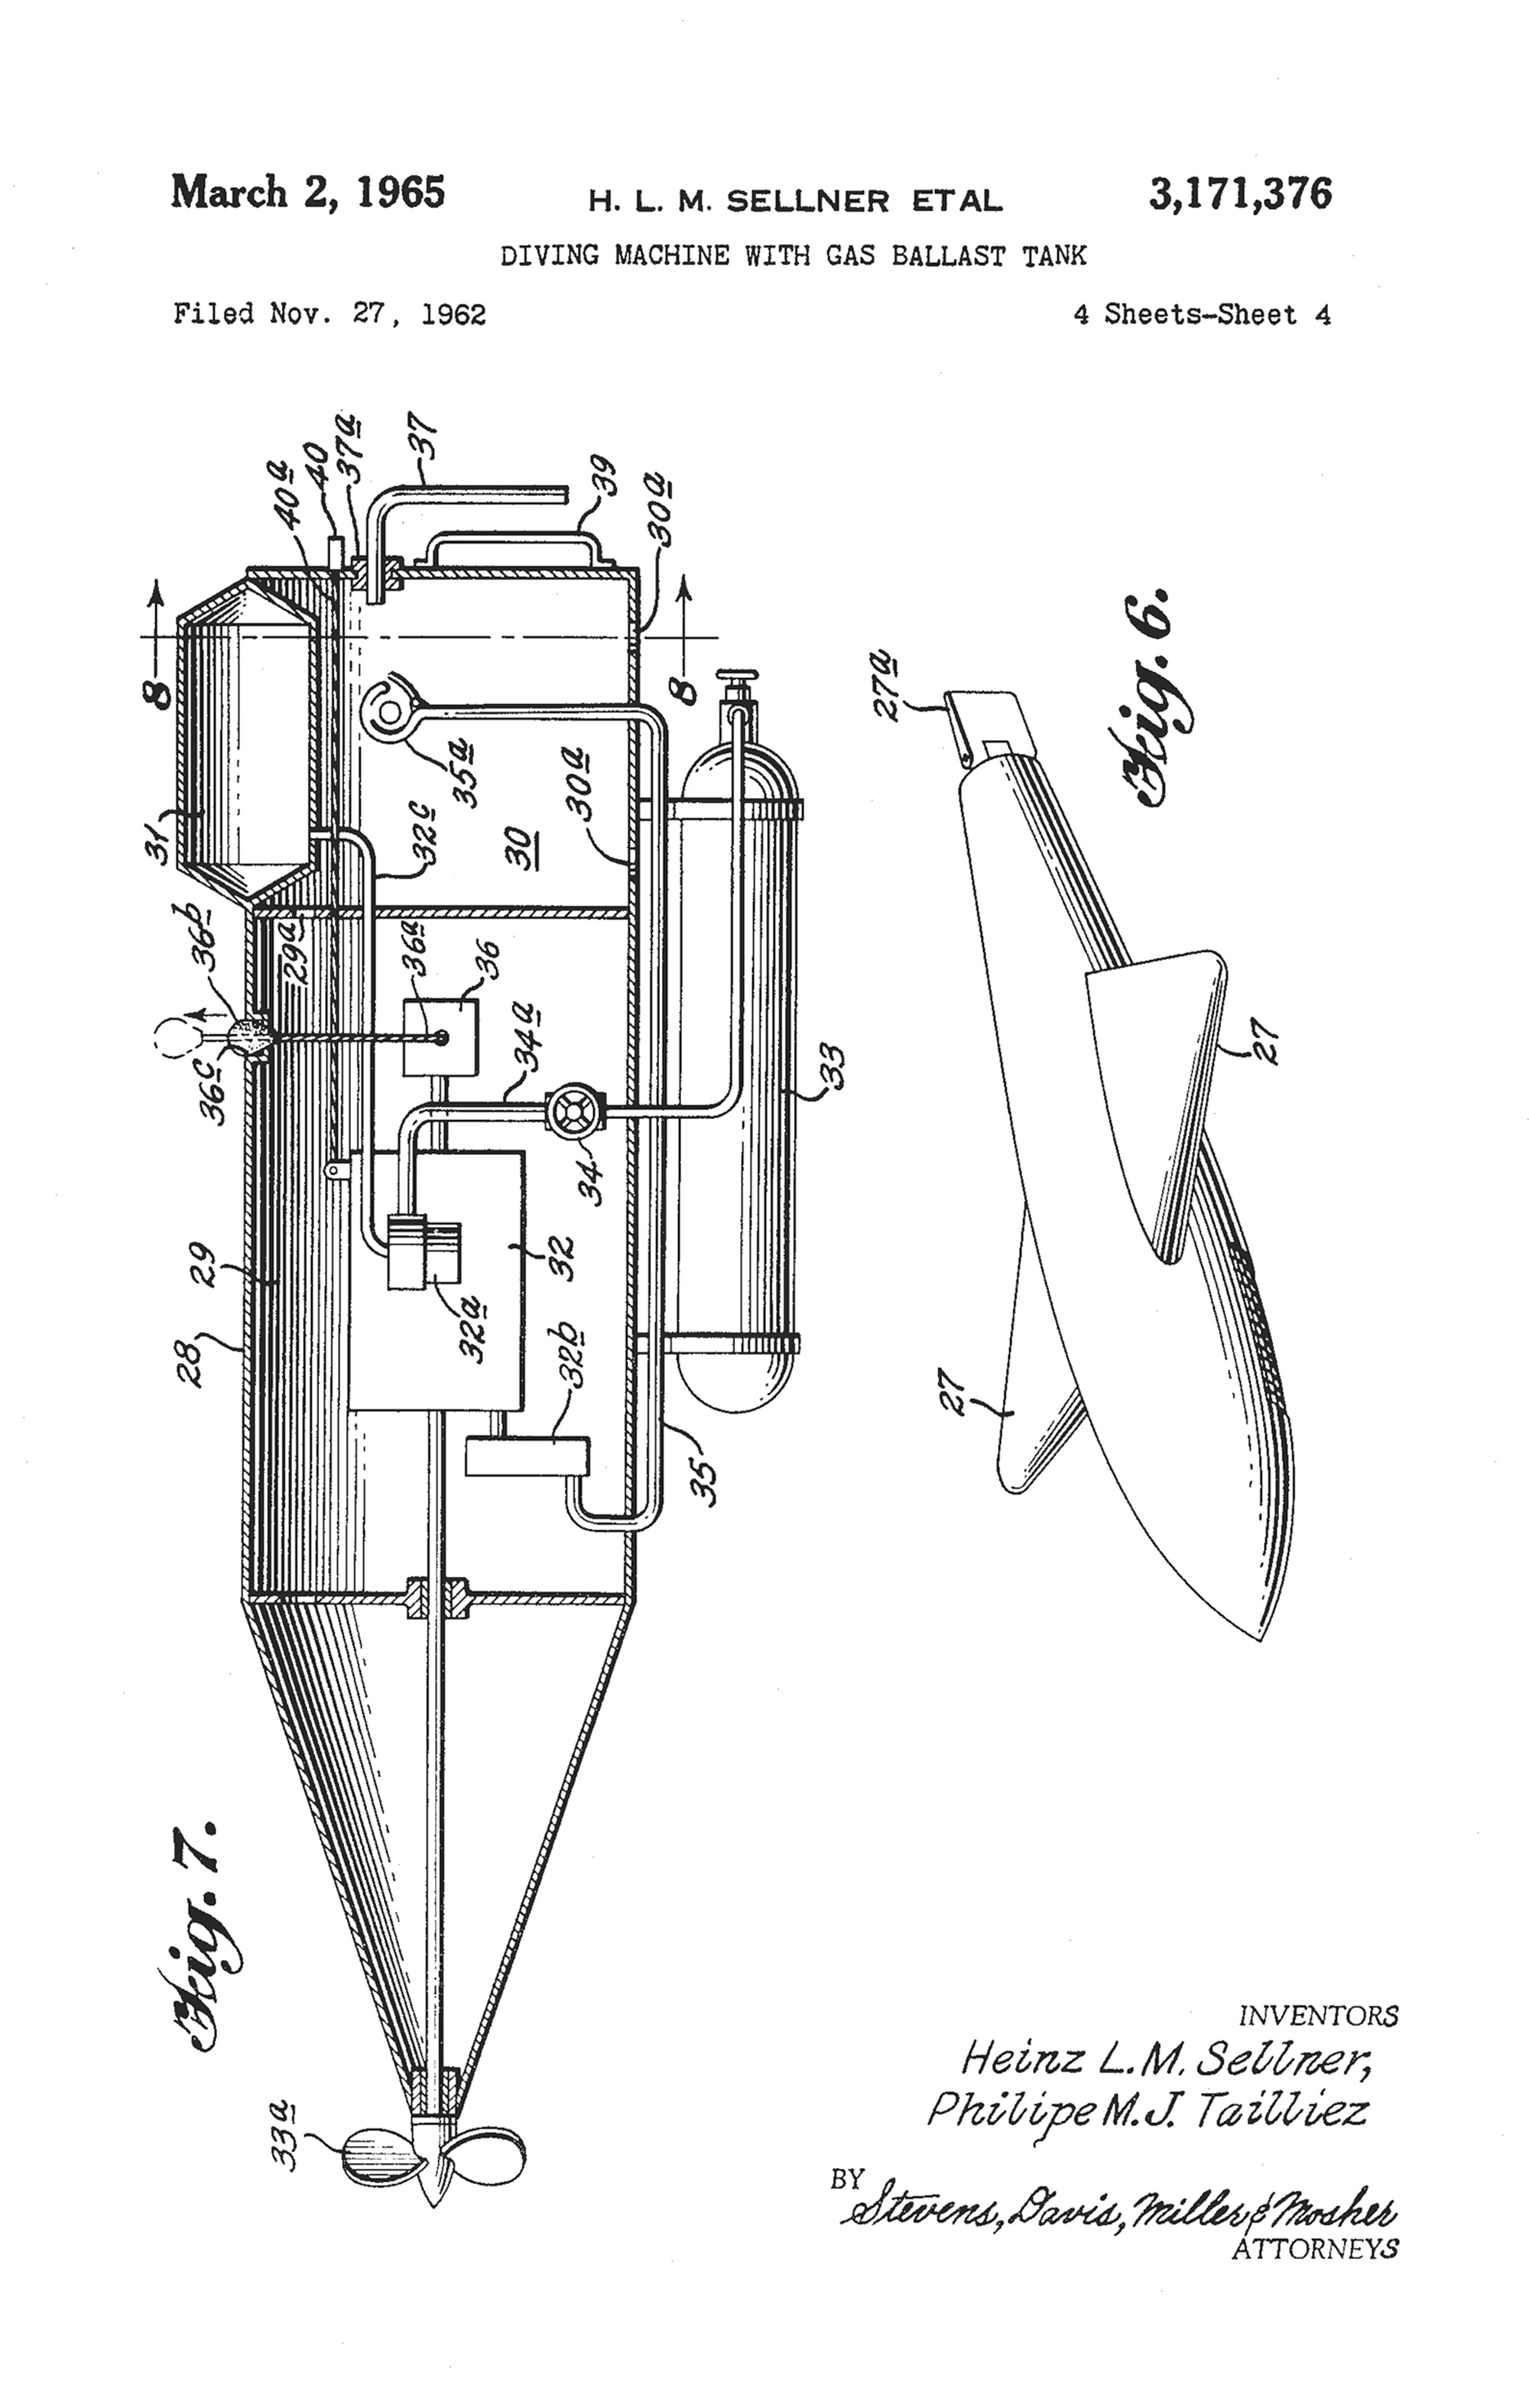 A page from a nineteen sixty-two patent application filed by Sellner and Tailliez. Their patent for a “diving machine with gas ballast tank” was granted in nineteen sixty-five.